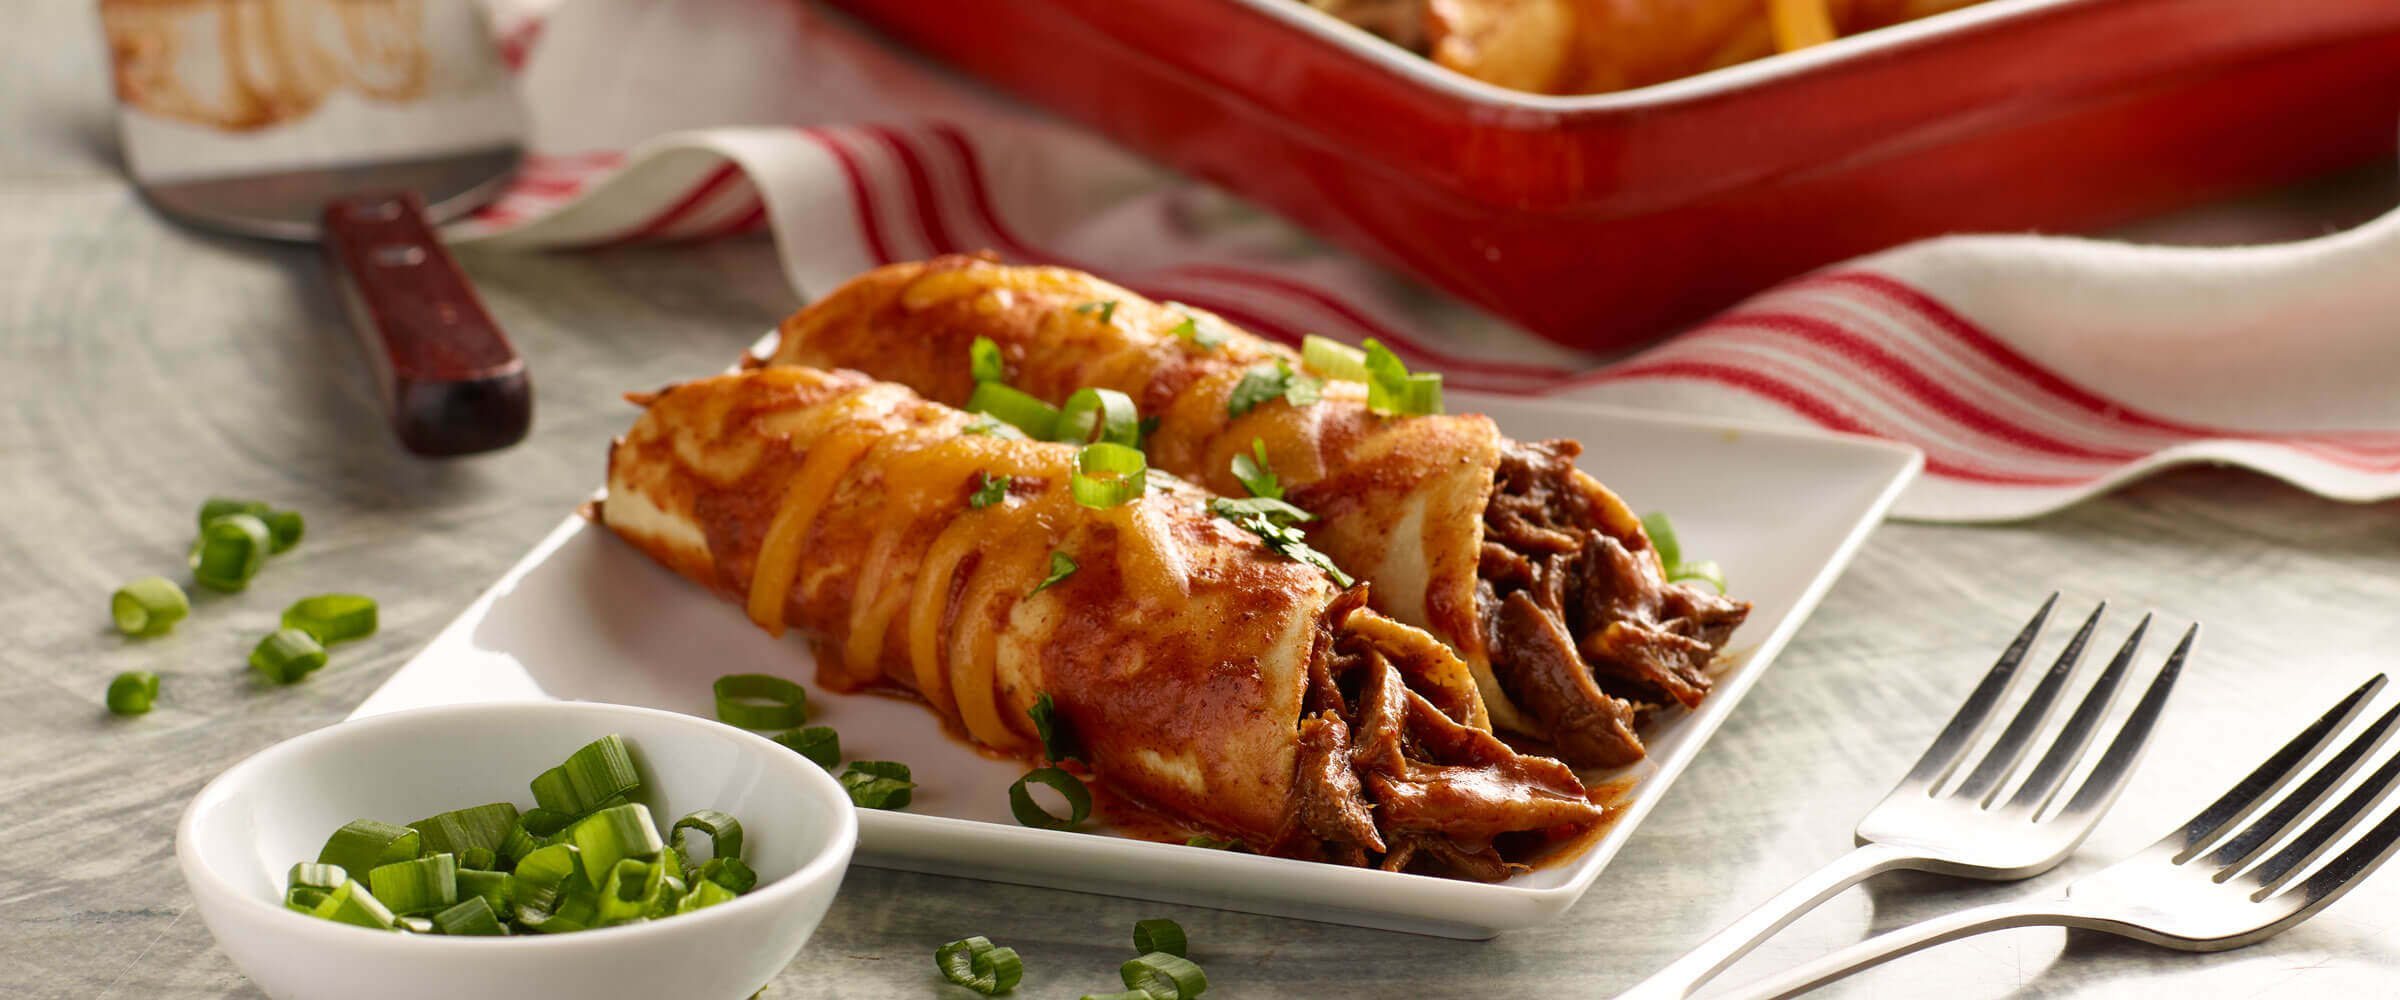 Shredded Beef Enchiladas on white plate with green onions to garnish